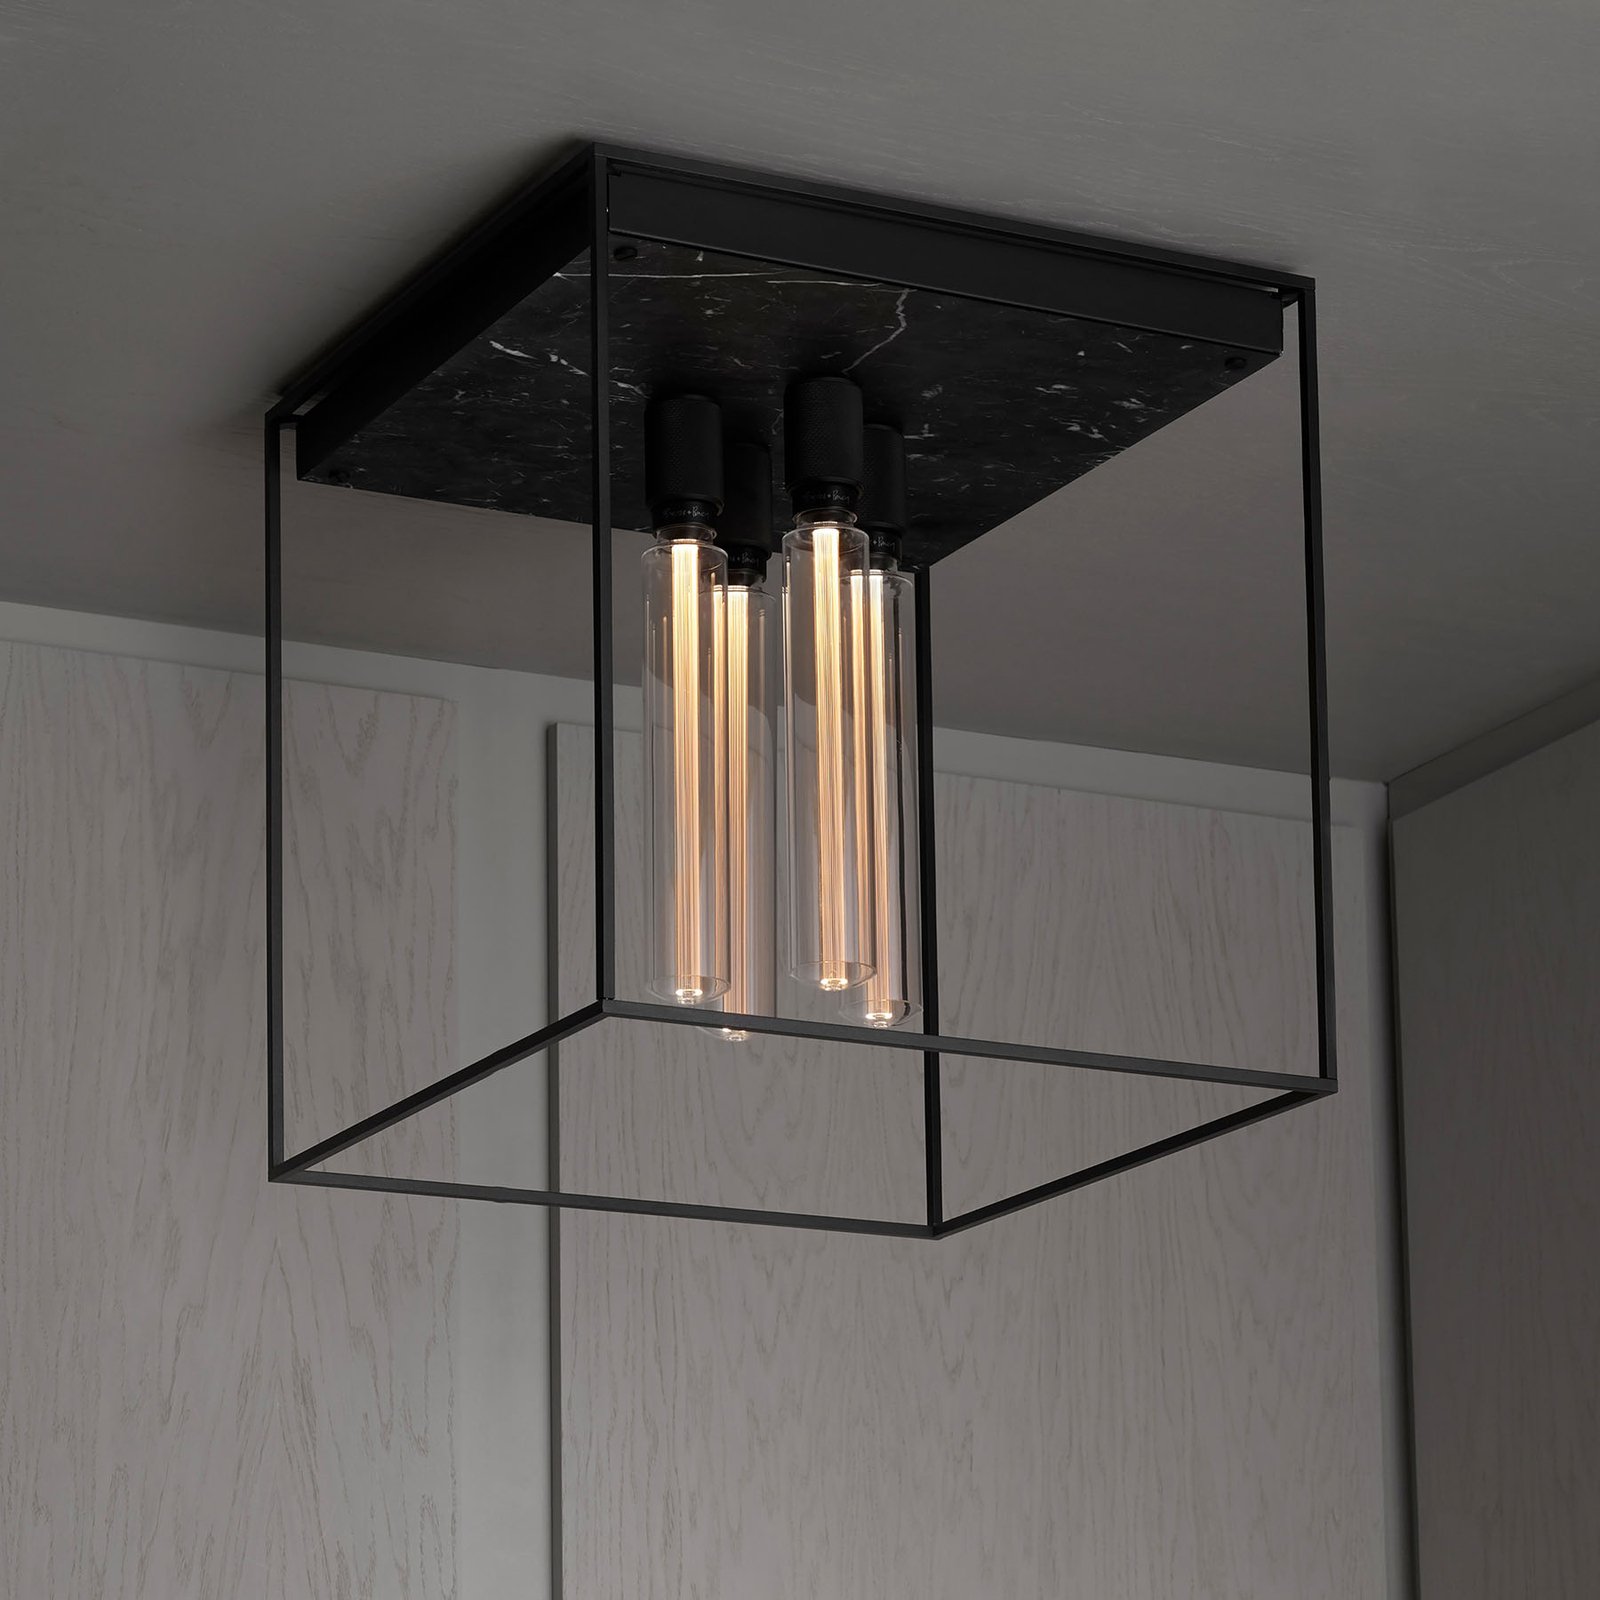 Buster + Punch Caged Ceiling 4.0 LED marmor svart